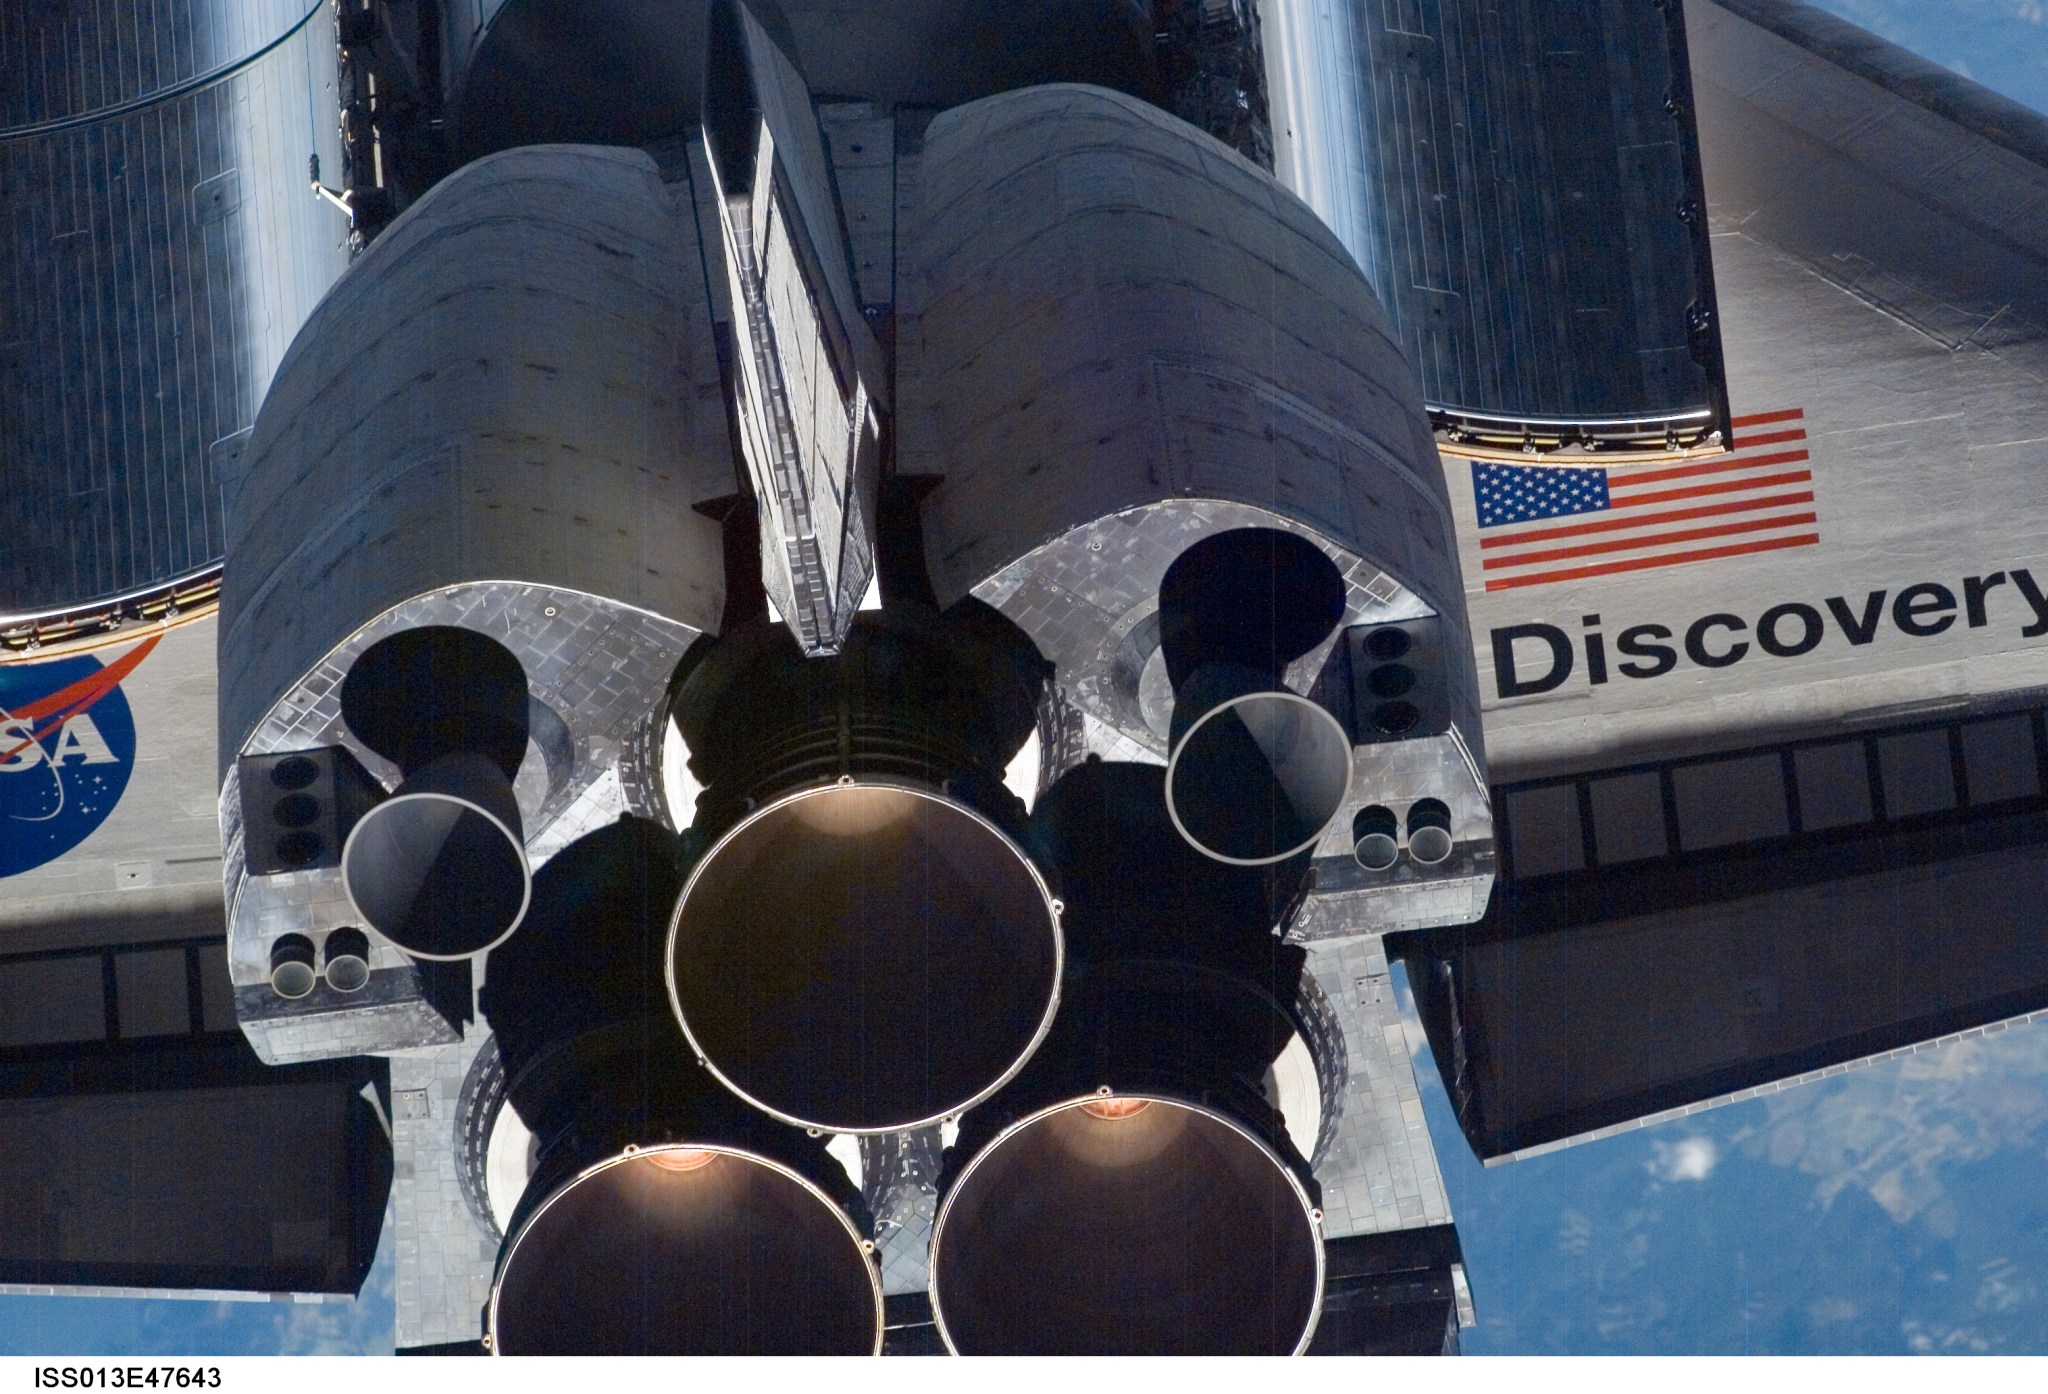 Space Shuttle Discovery makes its maiden spaceflight 